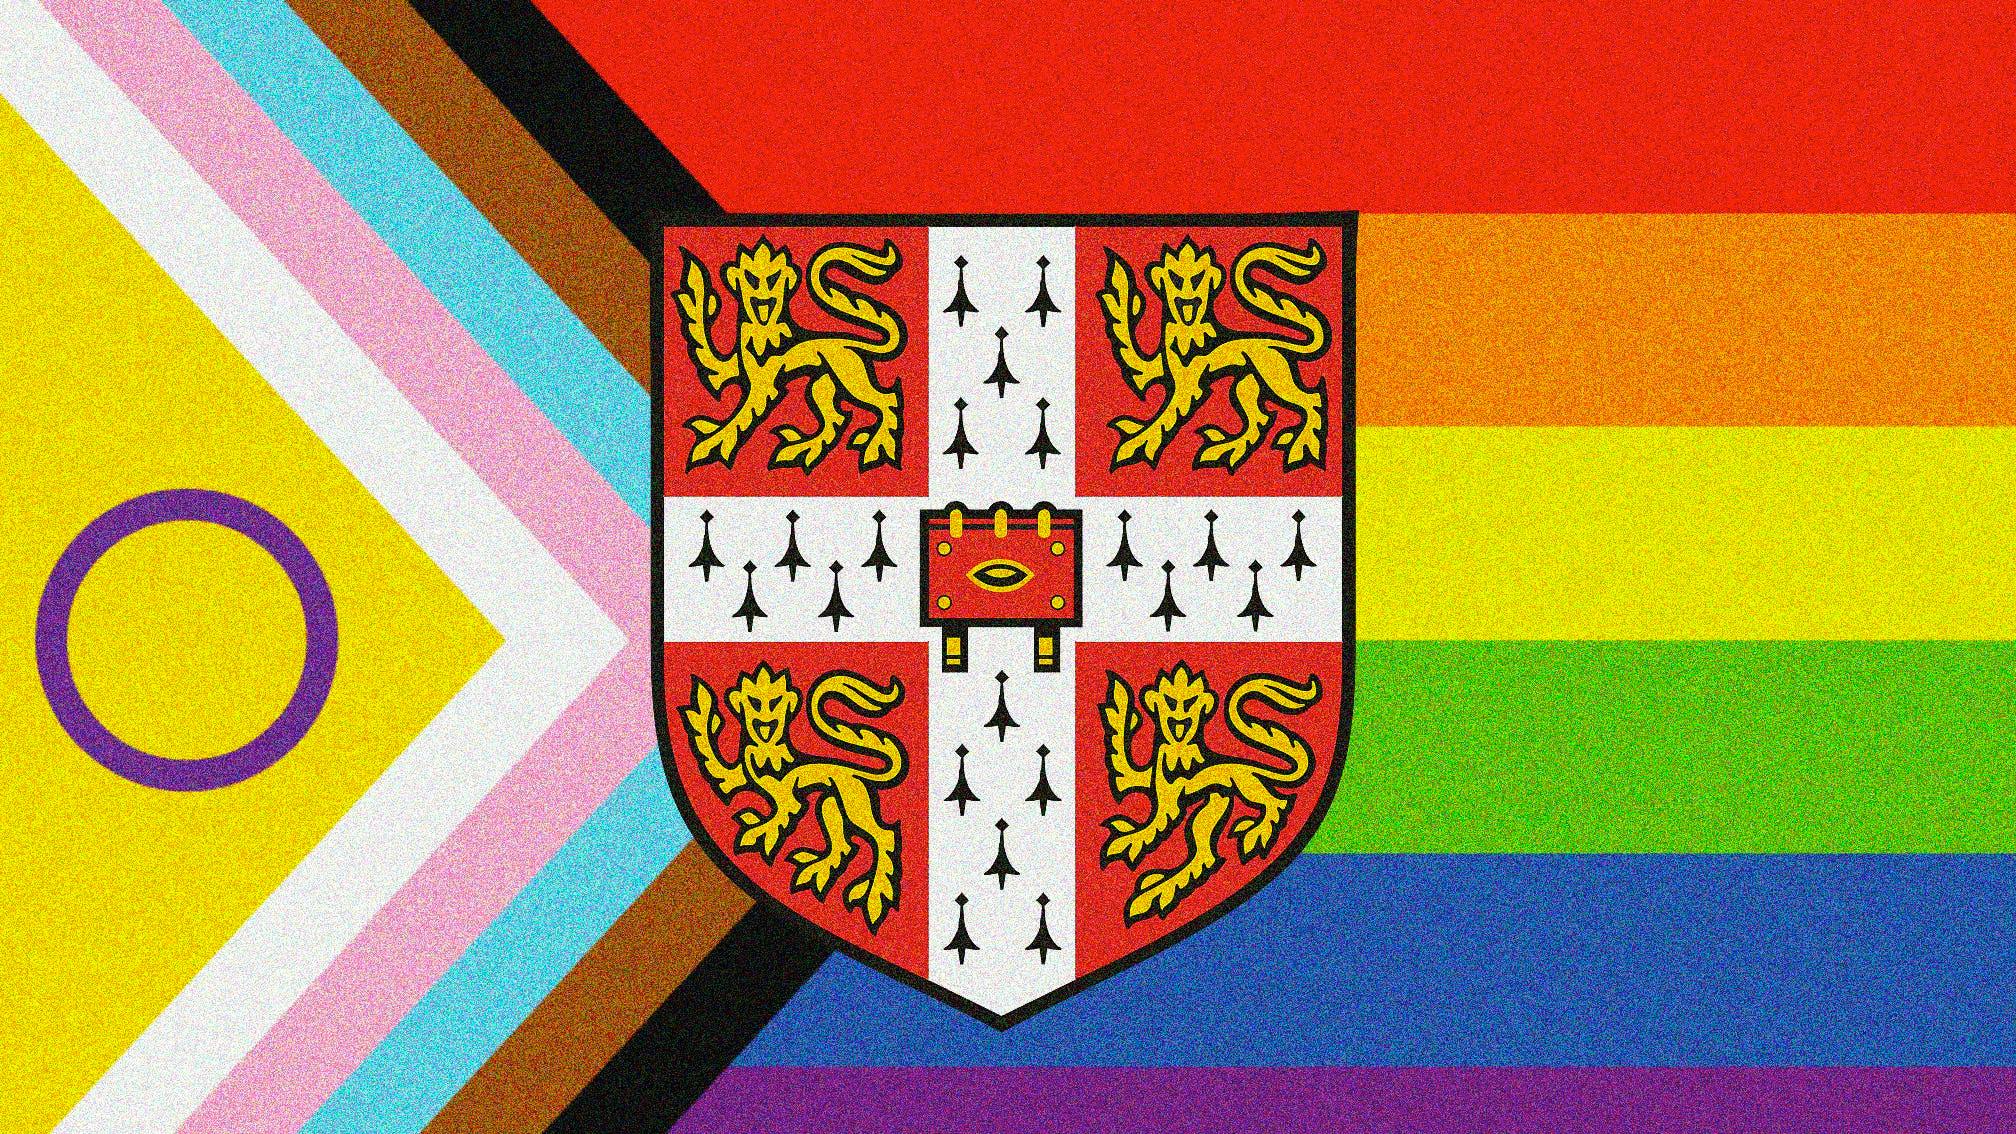 “There’s an active resistance against the way things have been”: How Cambridge students are championing its hidden queer scene